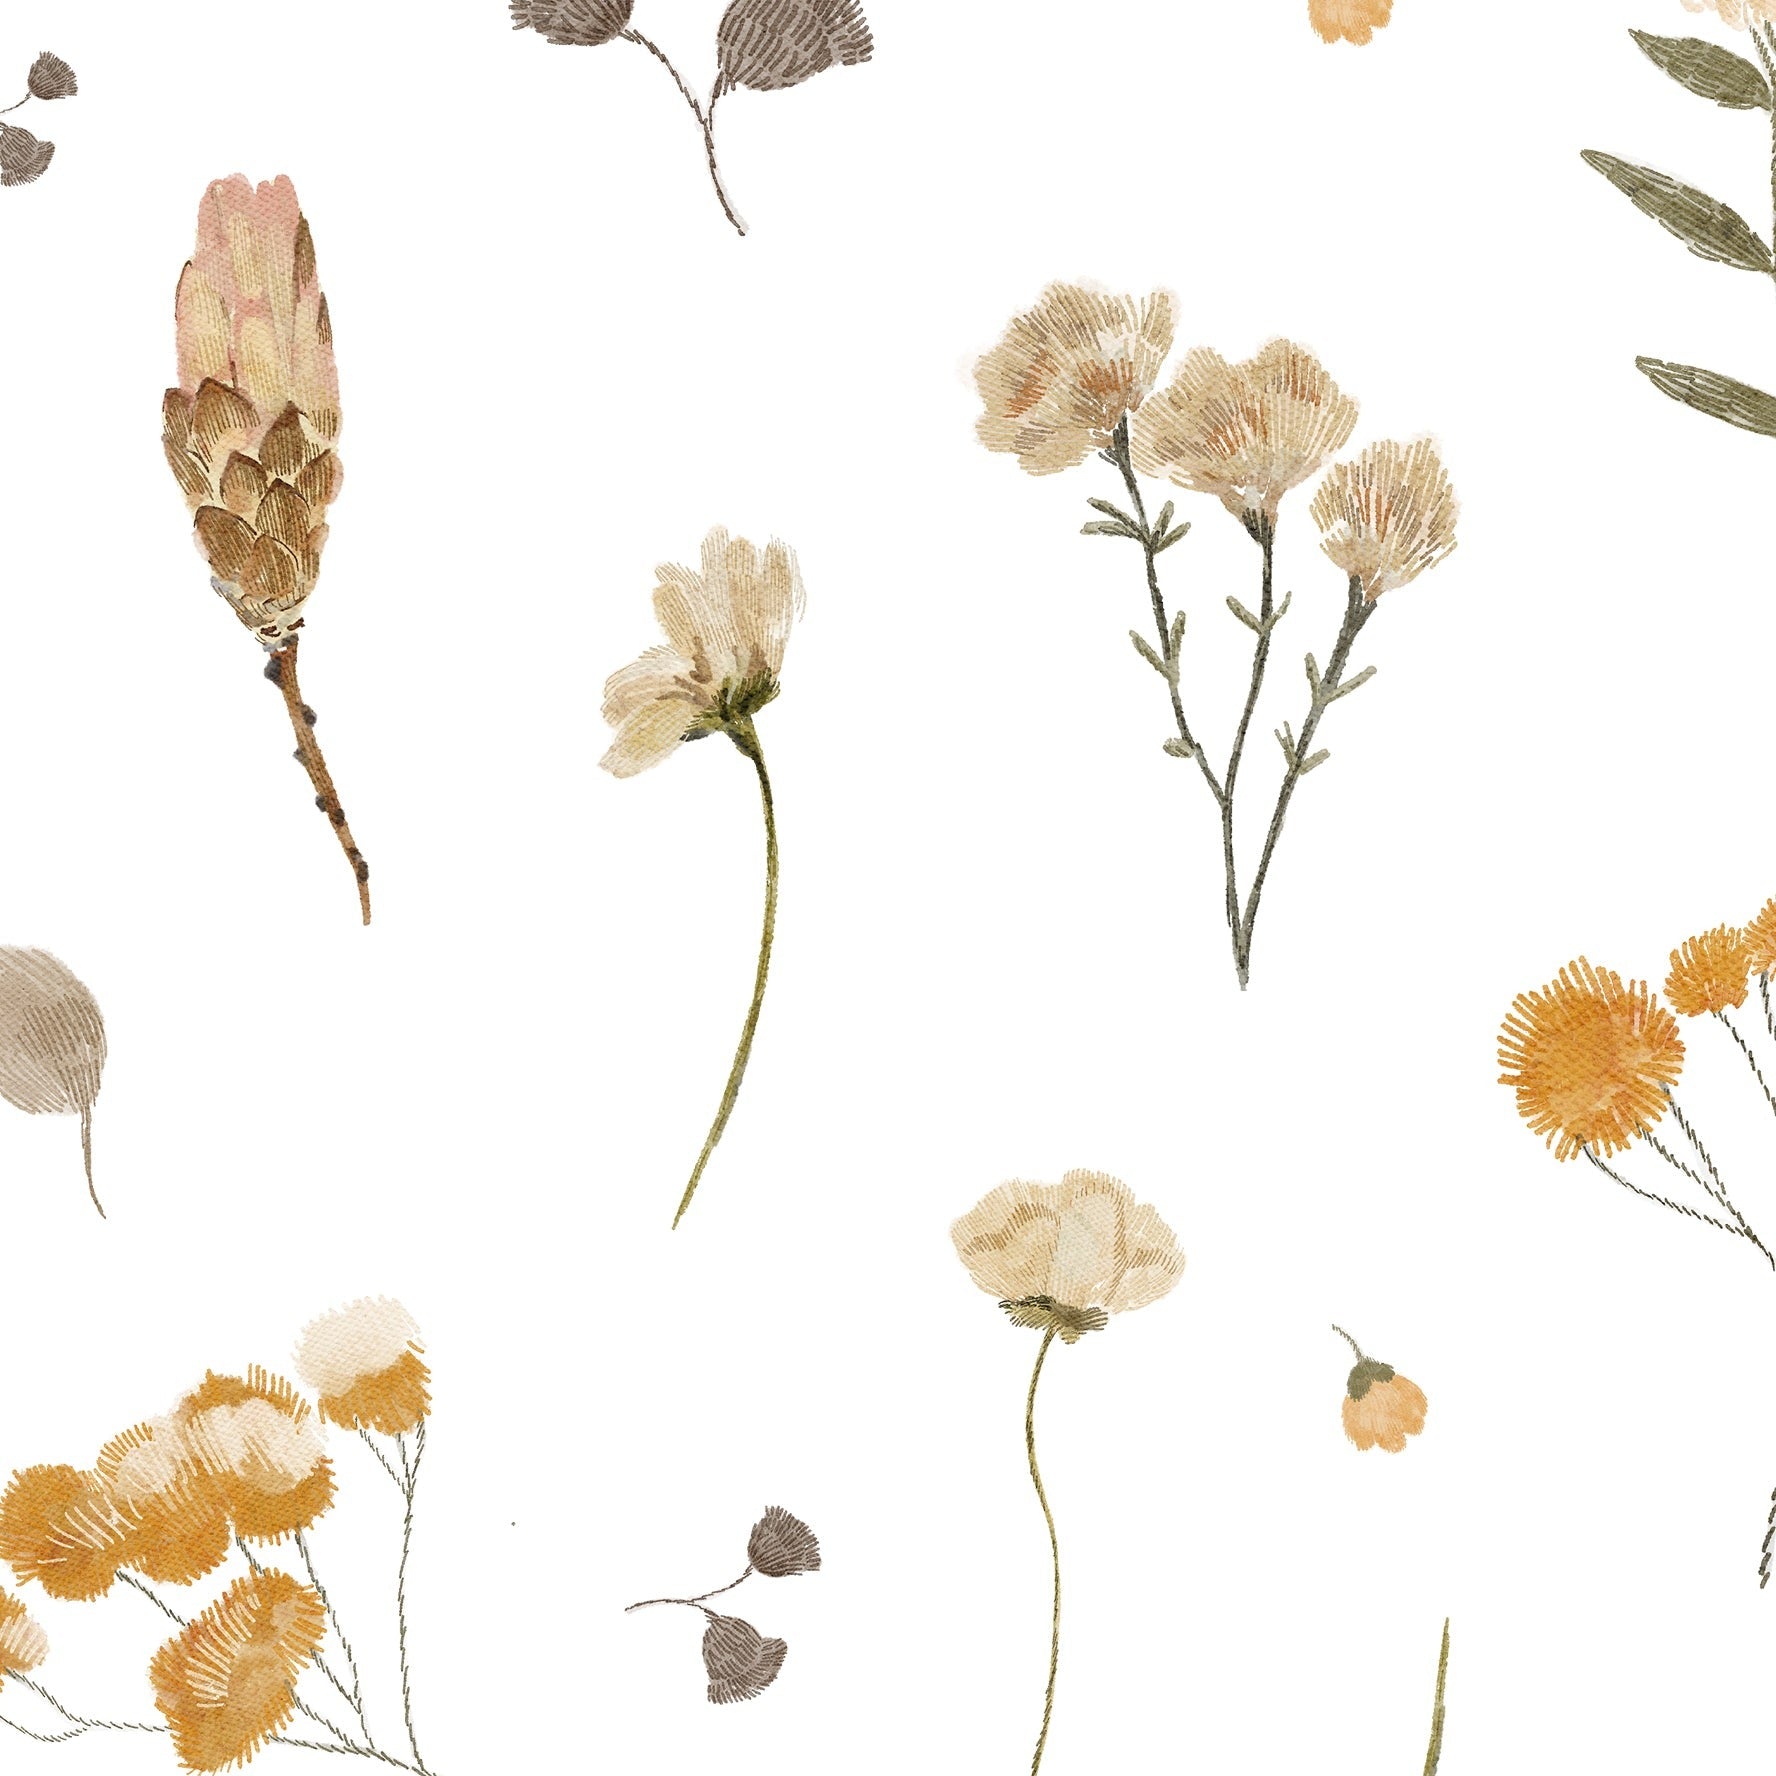 A close-up view of the Buttercup Fields Wallpaper pattern featuring detailed illustrations of buttercup flowers, delicate seed heads, and slender leaves in shades of yellow and gray on a crisp white backdrop, evoking a fresh springtime feel.